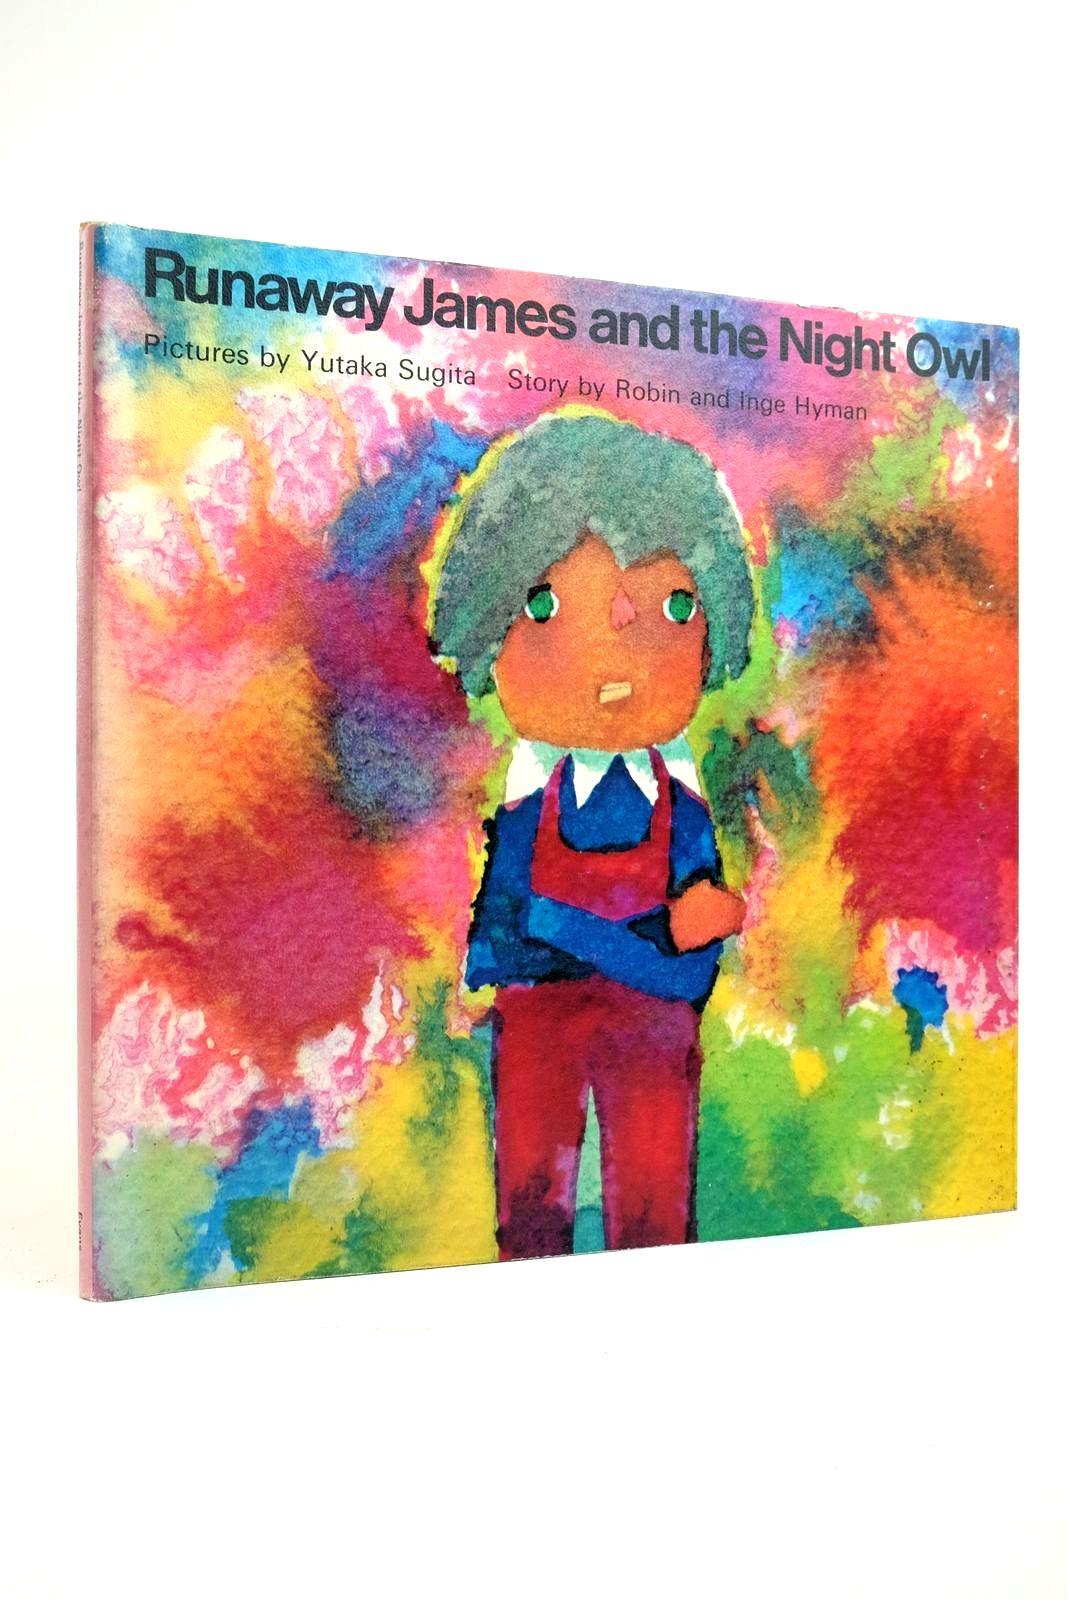 Photo of RUNAWAY JAMES AND THE NIGHT OWL written by Hyman, Robin
Hyman, Inge illustrated by Sugita, Yutaka published by Evans Brothers Limited (STOCK CODE: 2135574)  for sale by Stella & Rose's Books